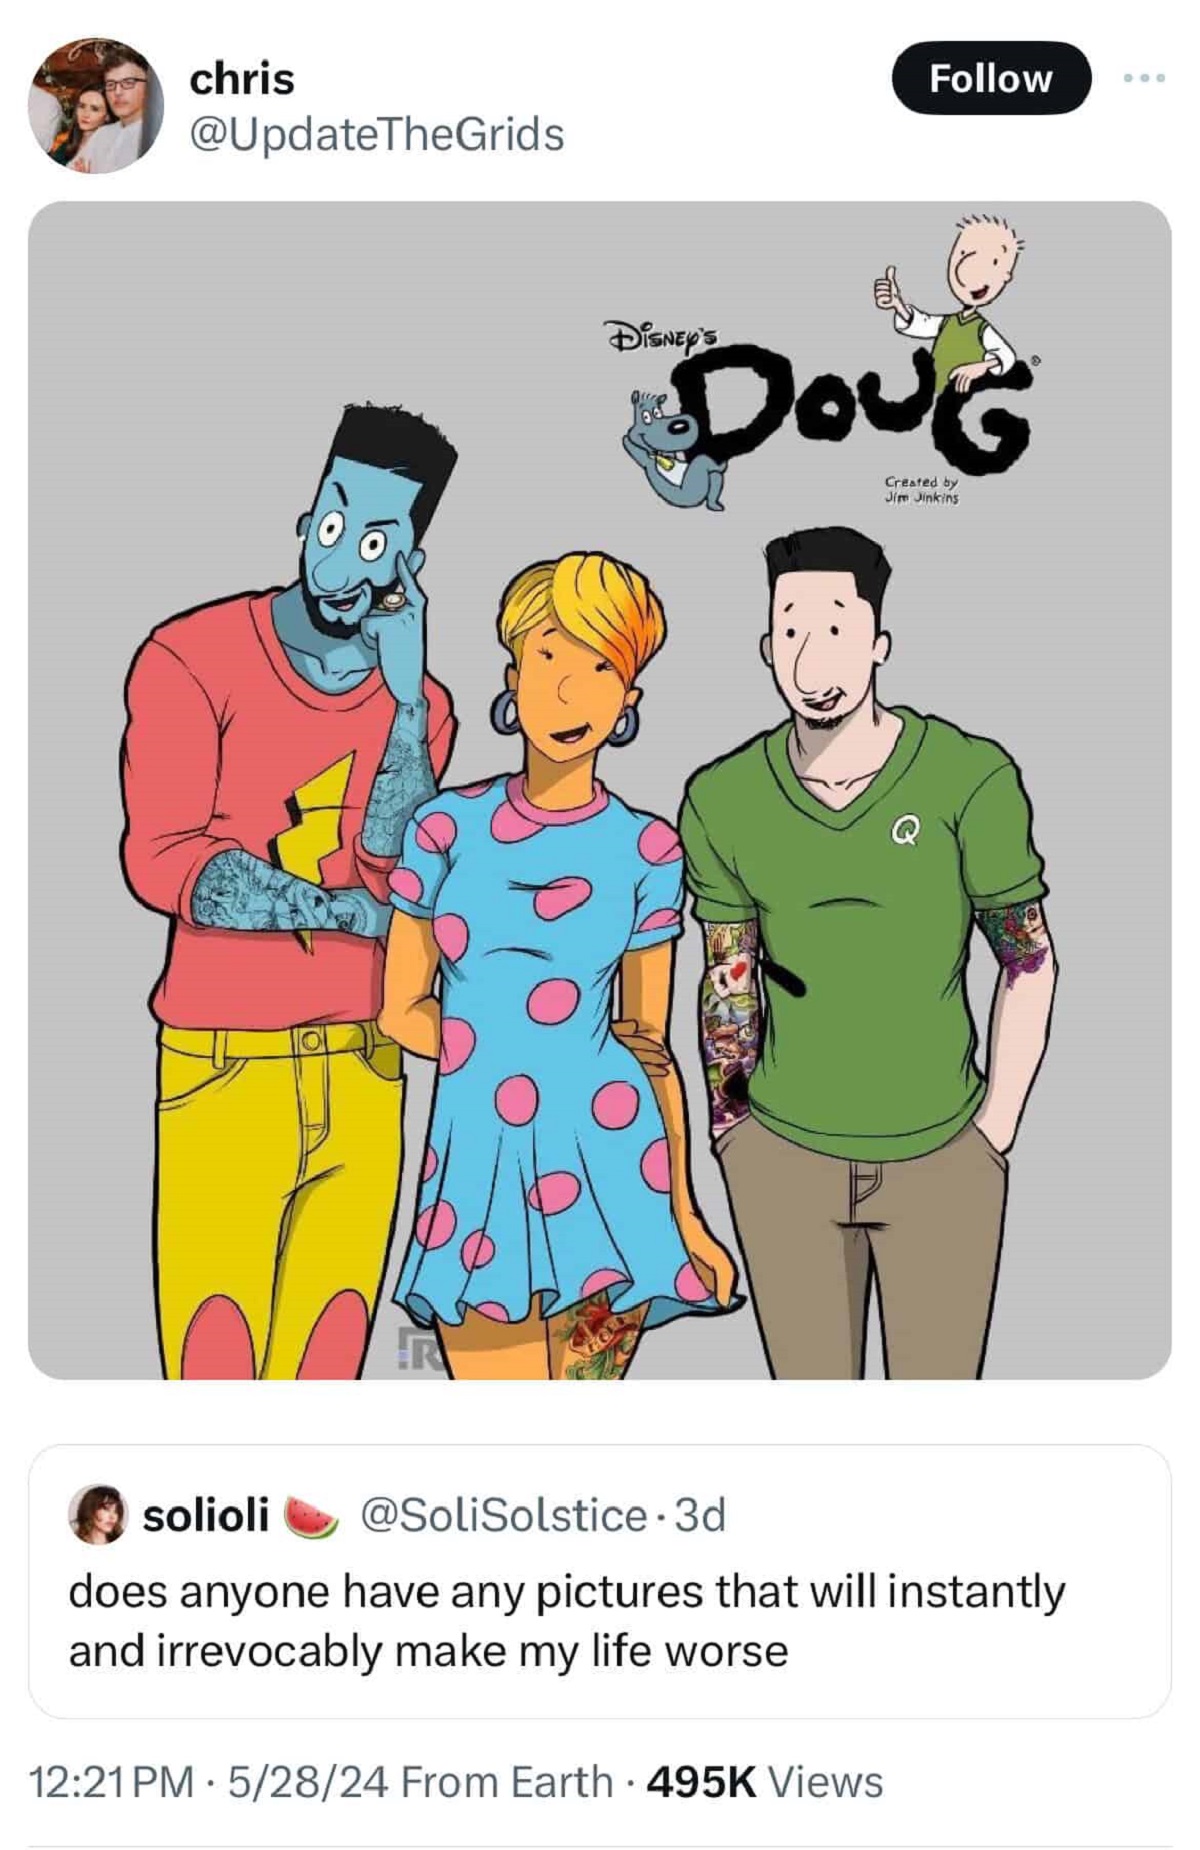 adult doug - chris Disney'S Doug Created by Jim Jinkins solioli .3d does anyone have any pictures that will instantly and irrevocably make my life worse 52824 From Earth Views